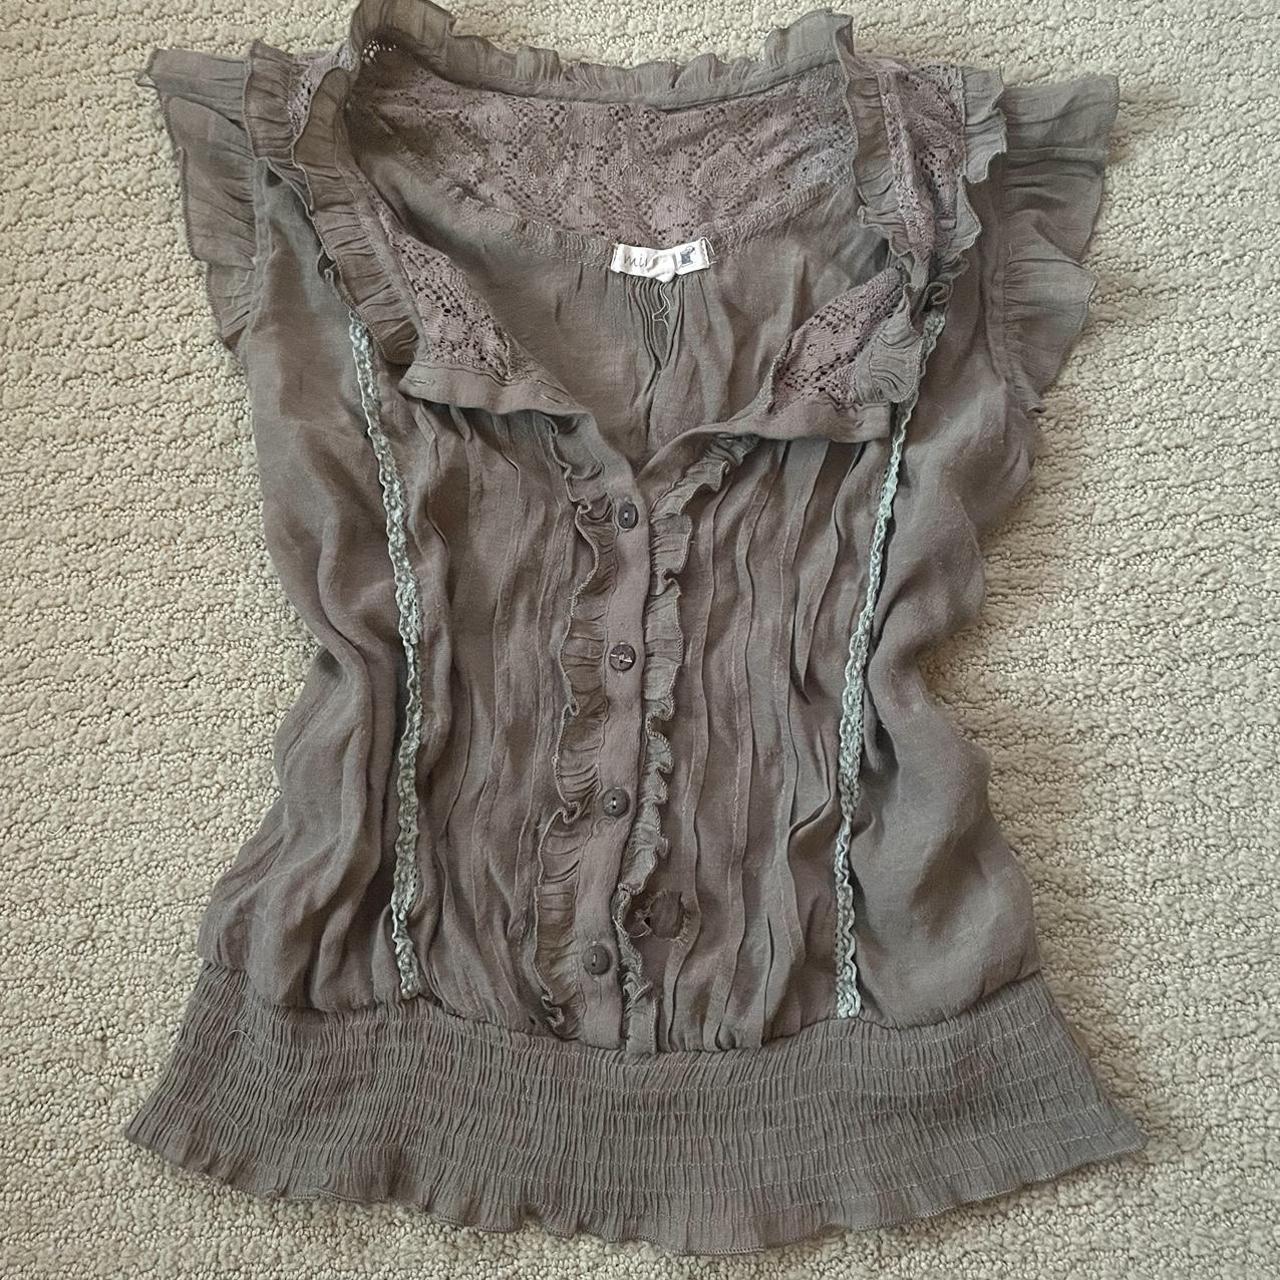 Super cute vintage twee/coquette style top from the - Depop